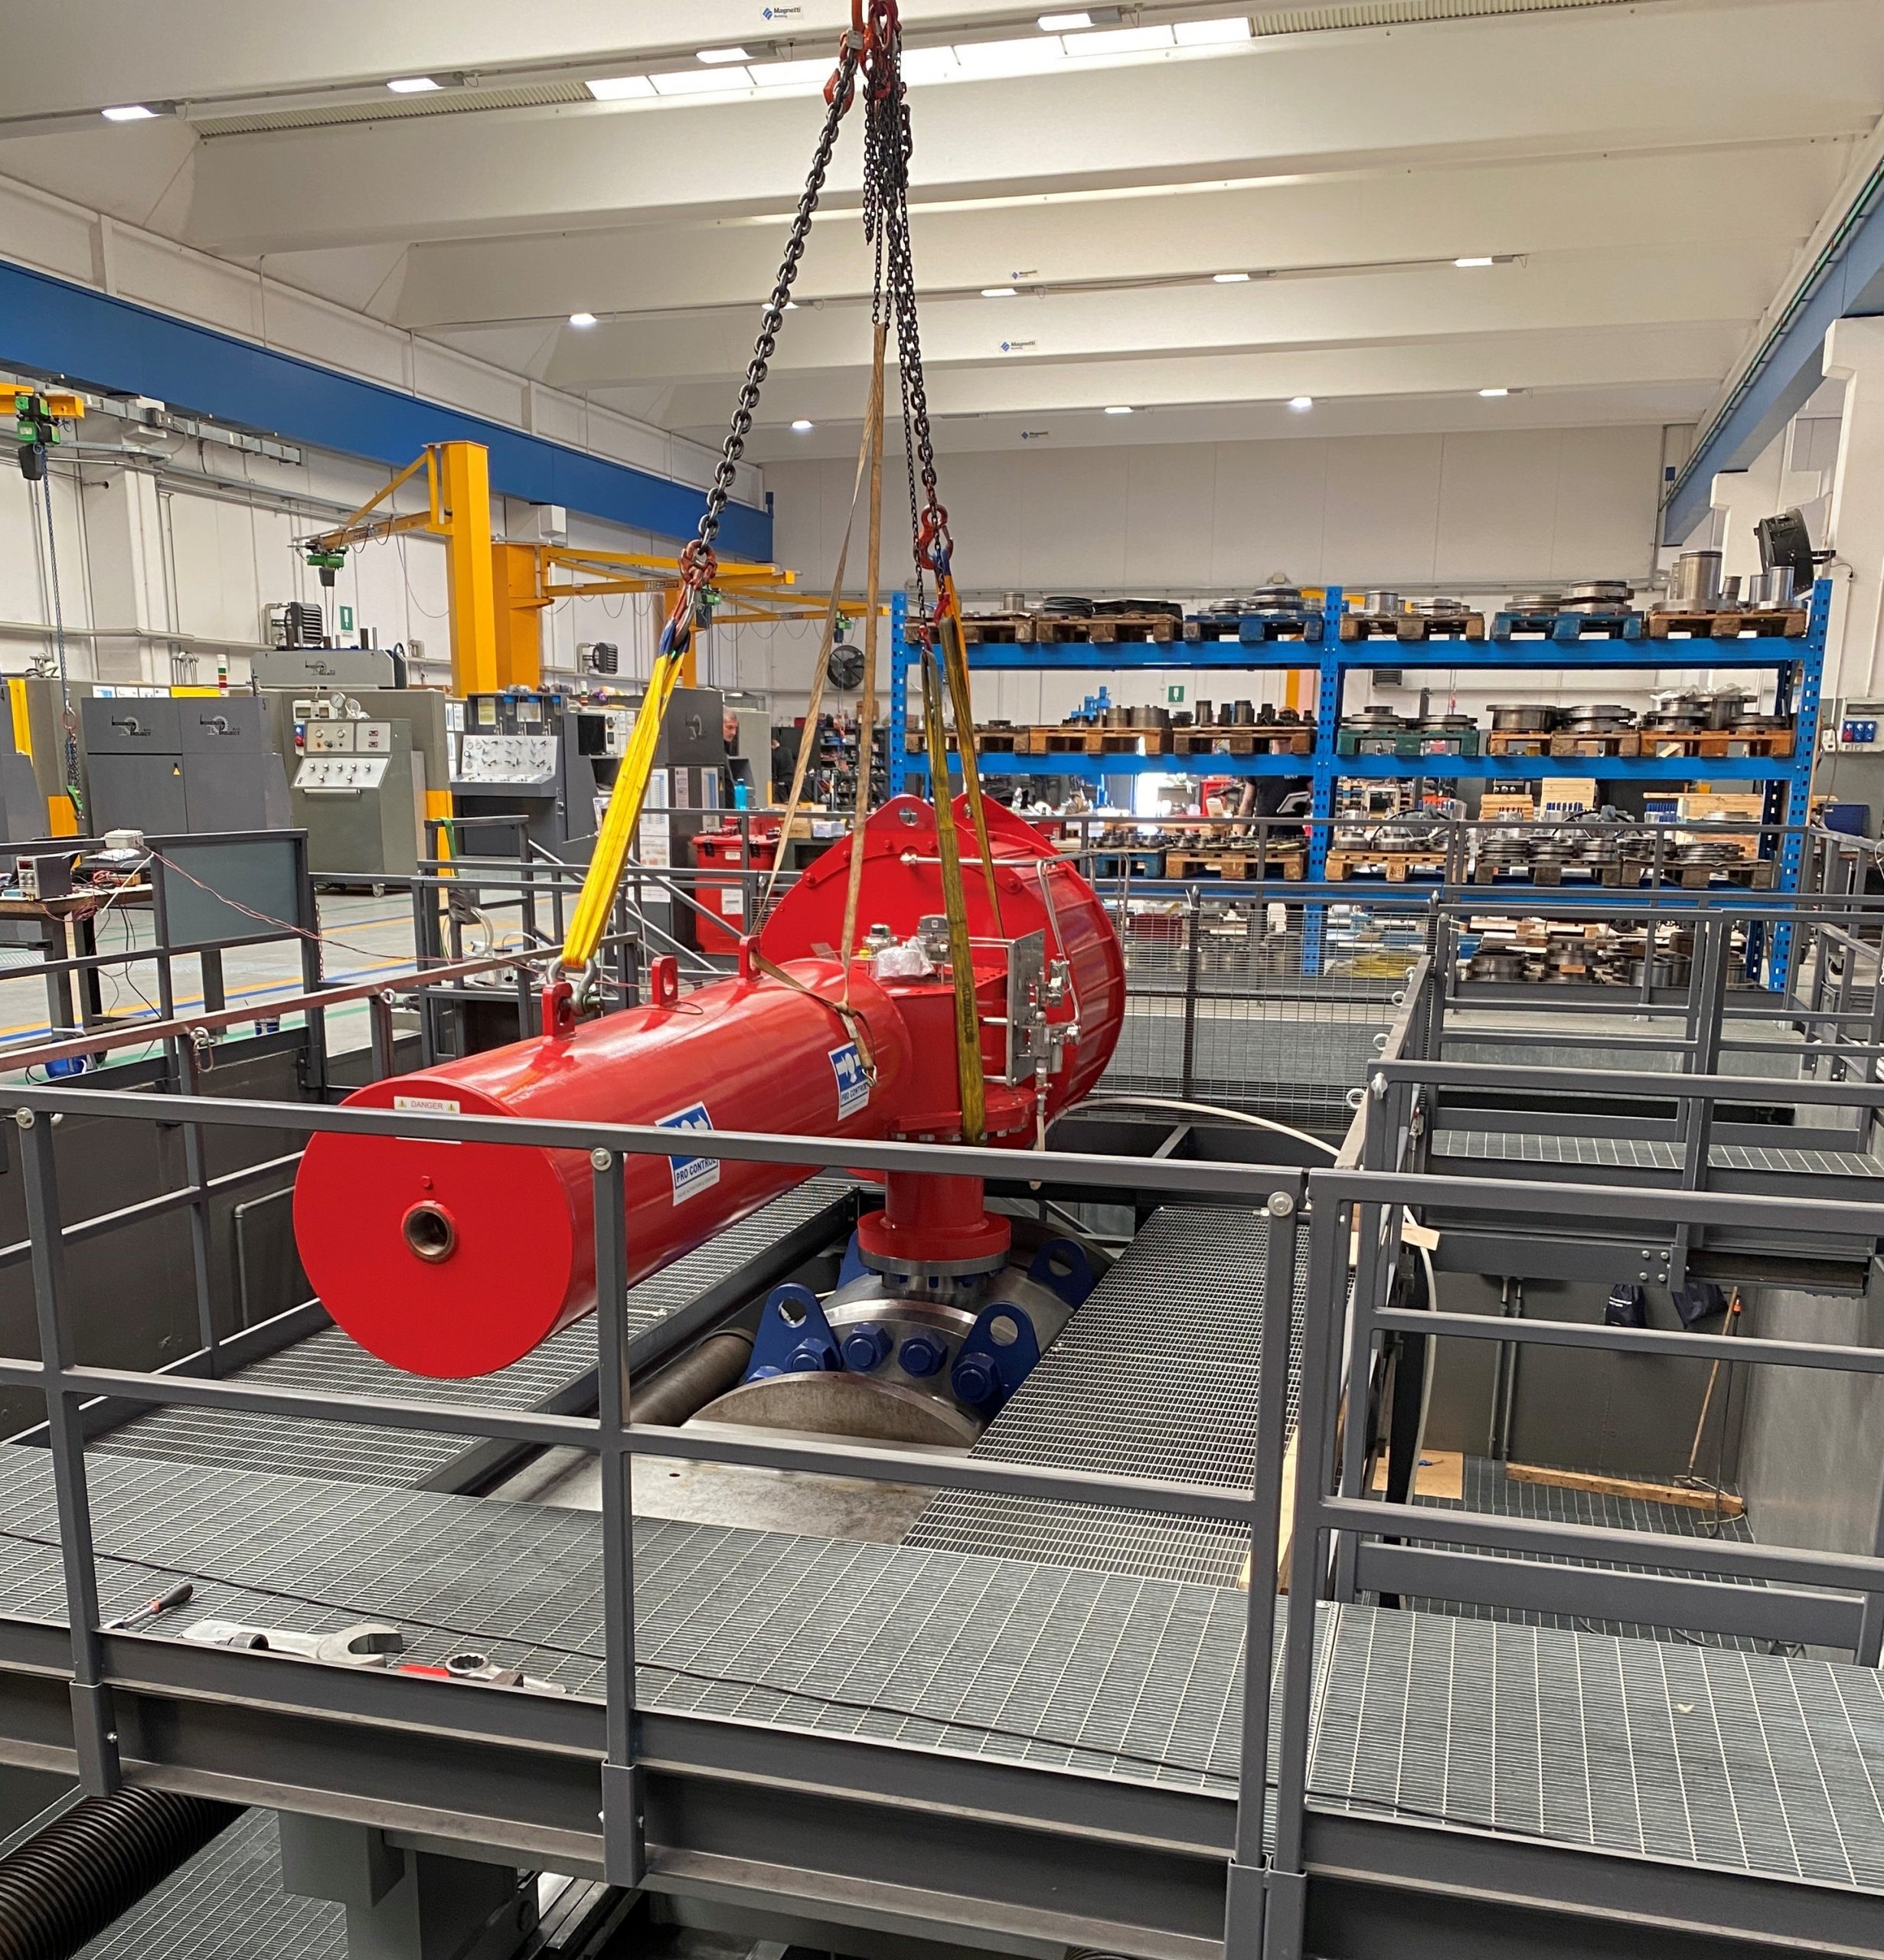 Actuated Trunnion Ball valve 26″ Class 1500 under testing